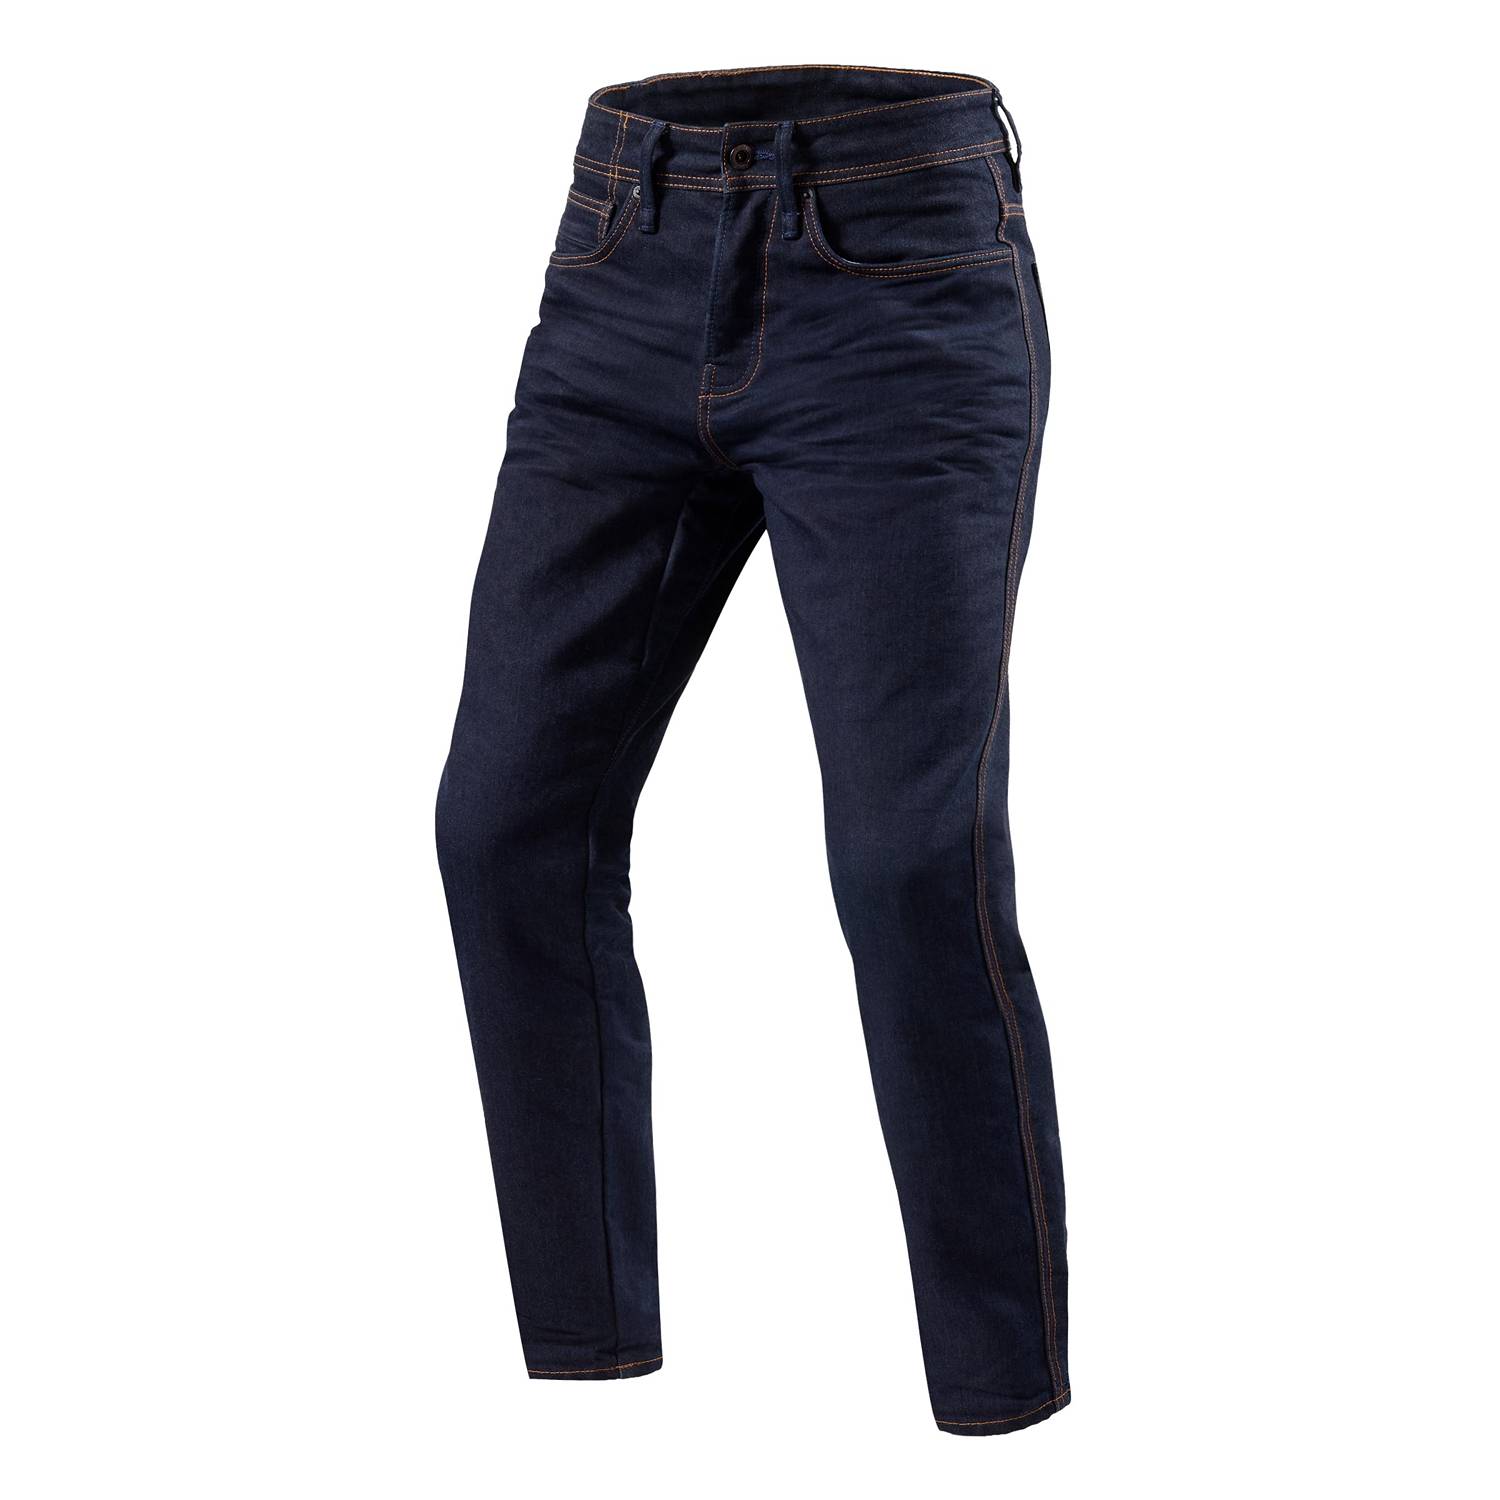 Image of REV'IT! Jeans Reed RF Dark Blue Used Motorcycle Jeans Size L34/W33 ID 8700001336918